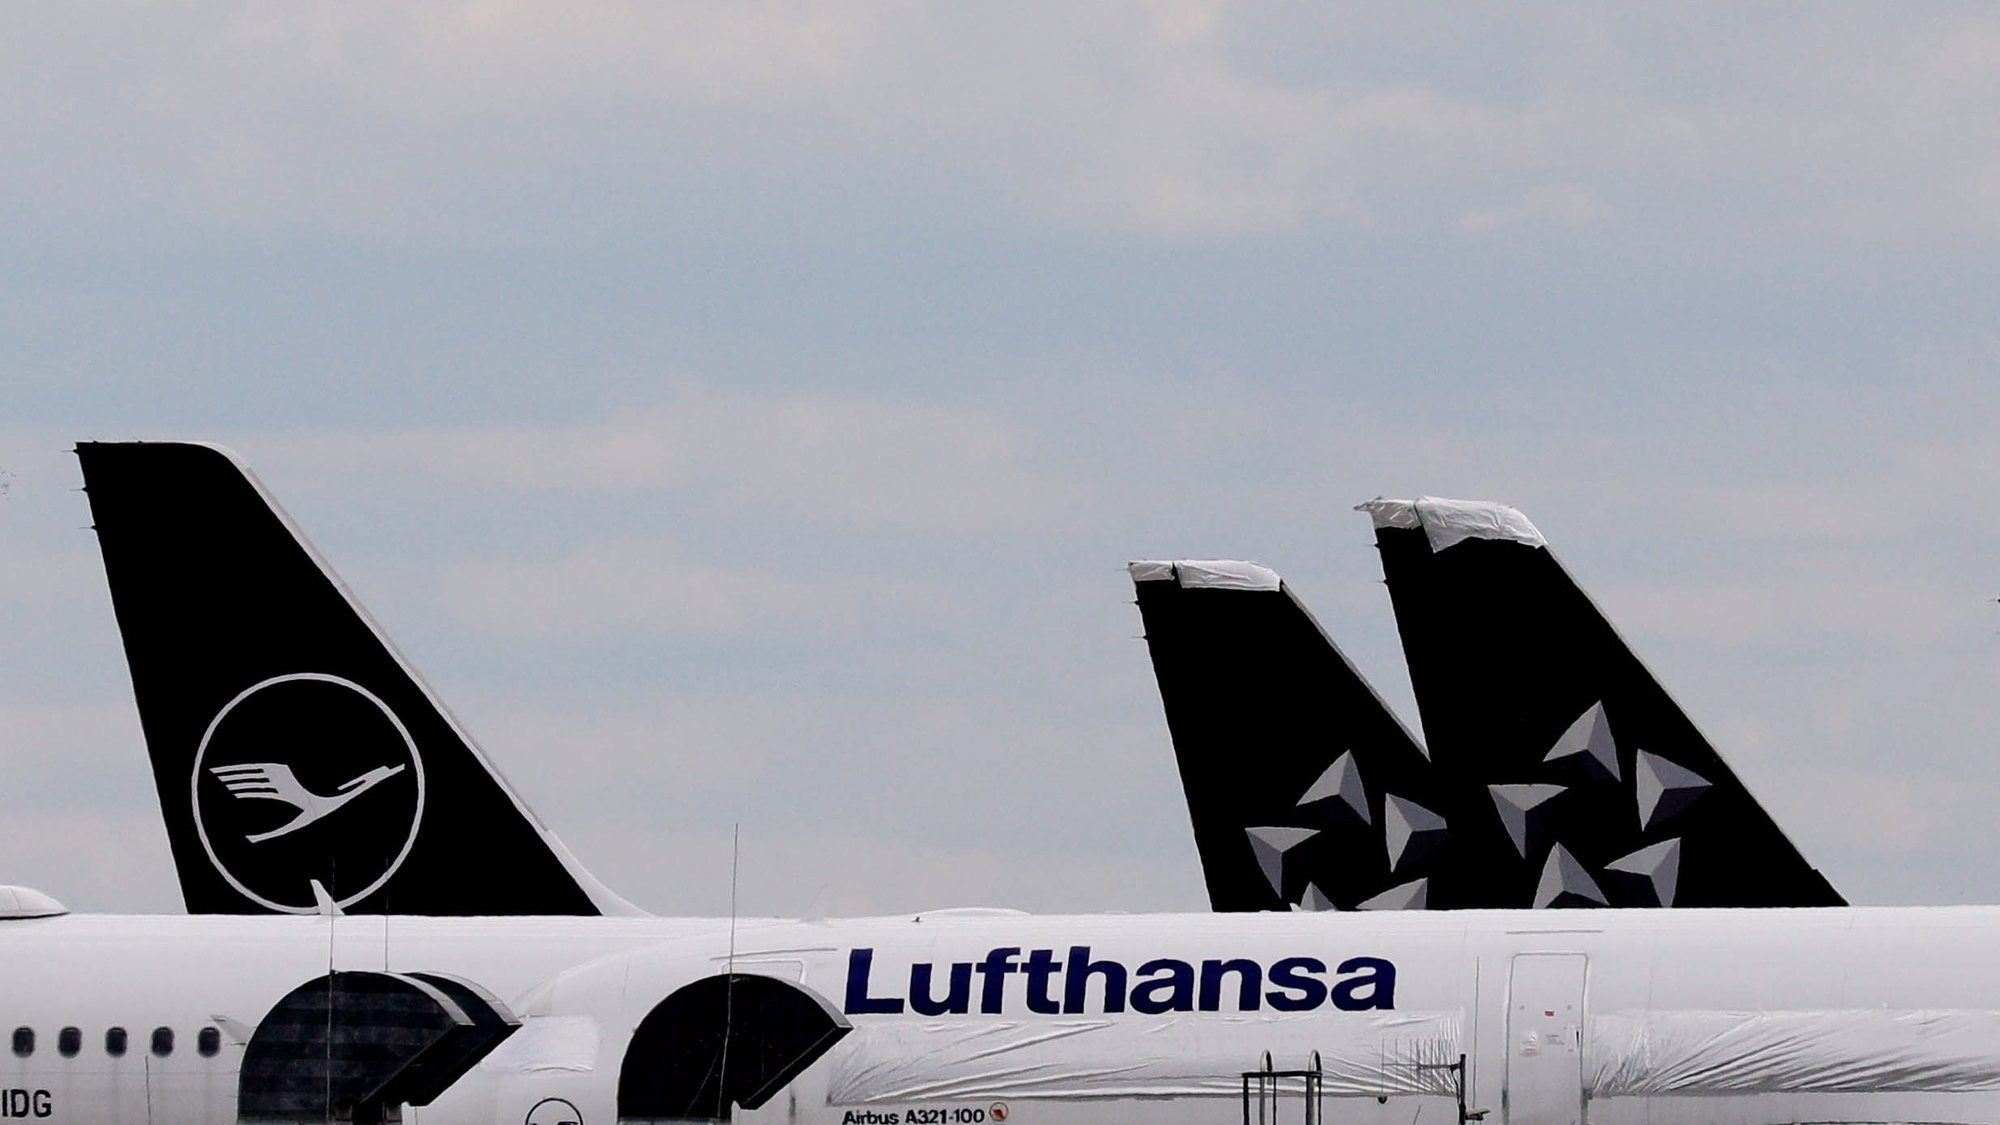 epa09175473 Lufthansa passenger planes are parked at Berlin Brandenburg International Airport in Schoenefeld, Germany, 03 May 2021. Lufthansa AG General Meeting will be held virtually on 04 May 2021.  EPA/FILIP SINGER